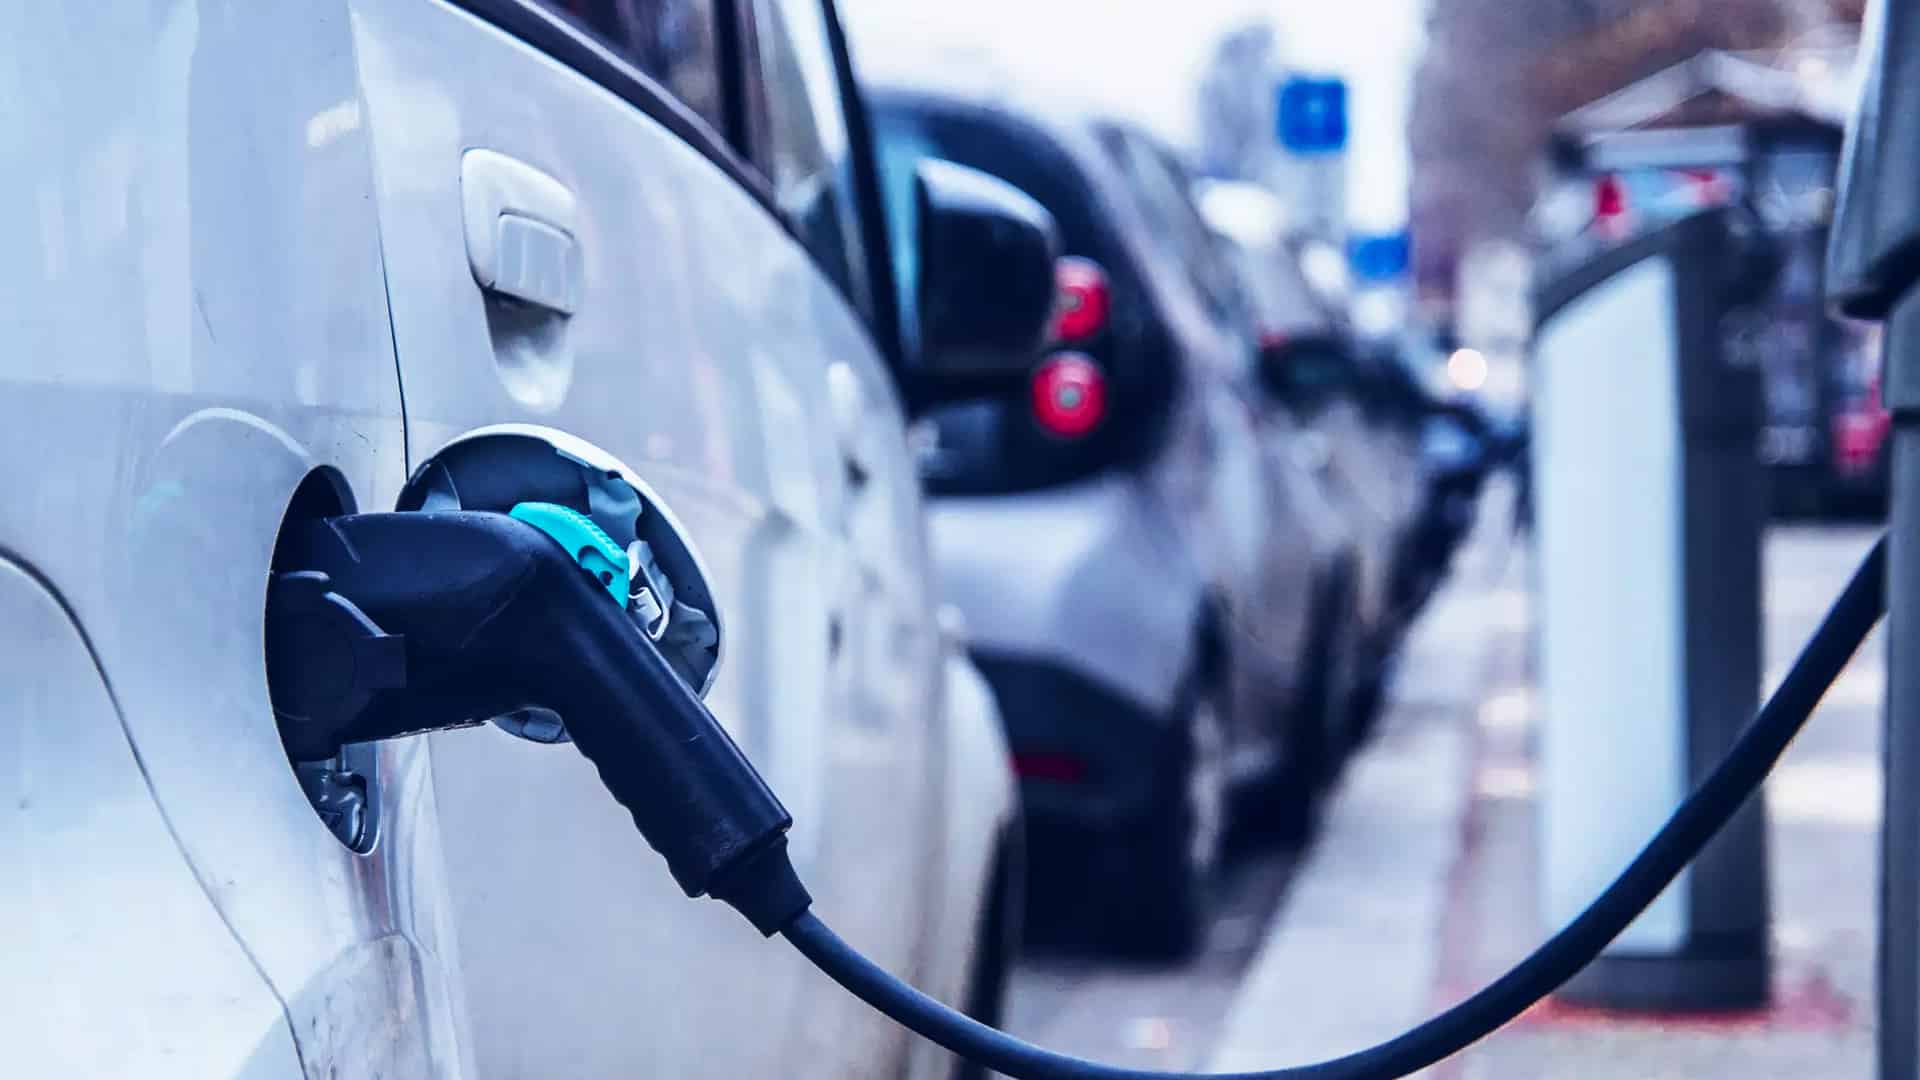 Nupur Recyclers to set up 200 EV charging points, battery swapping stations